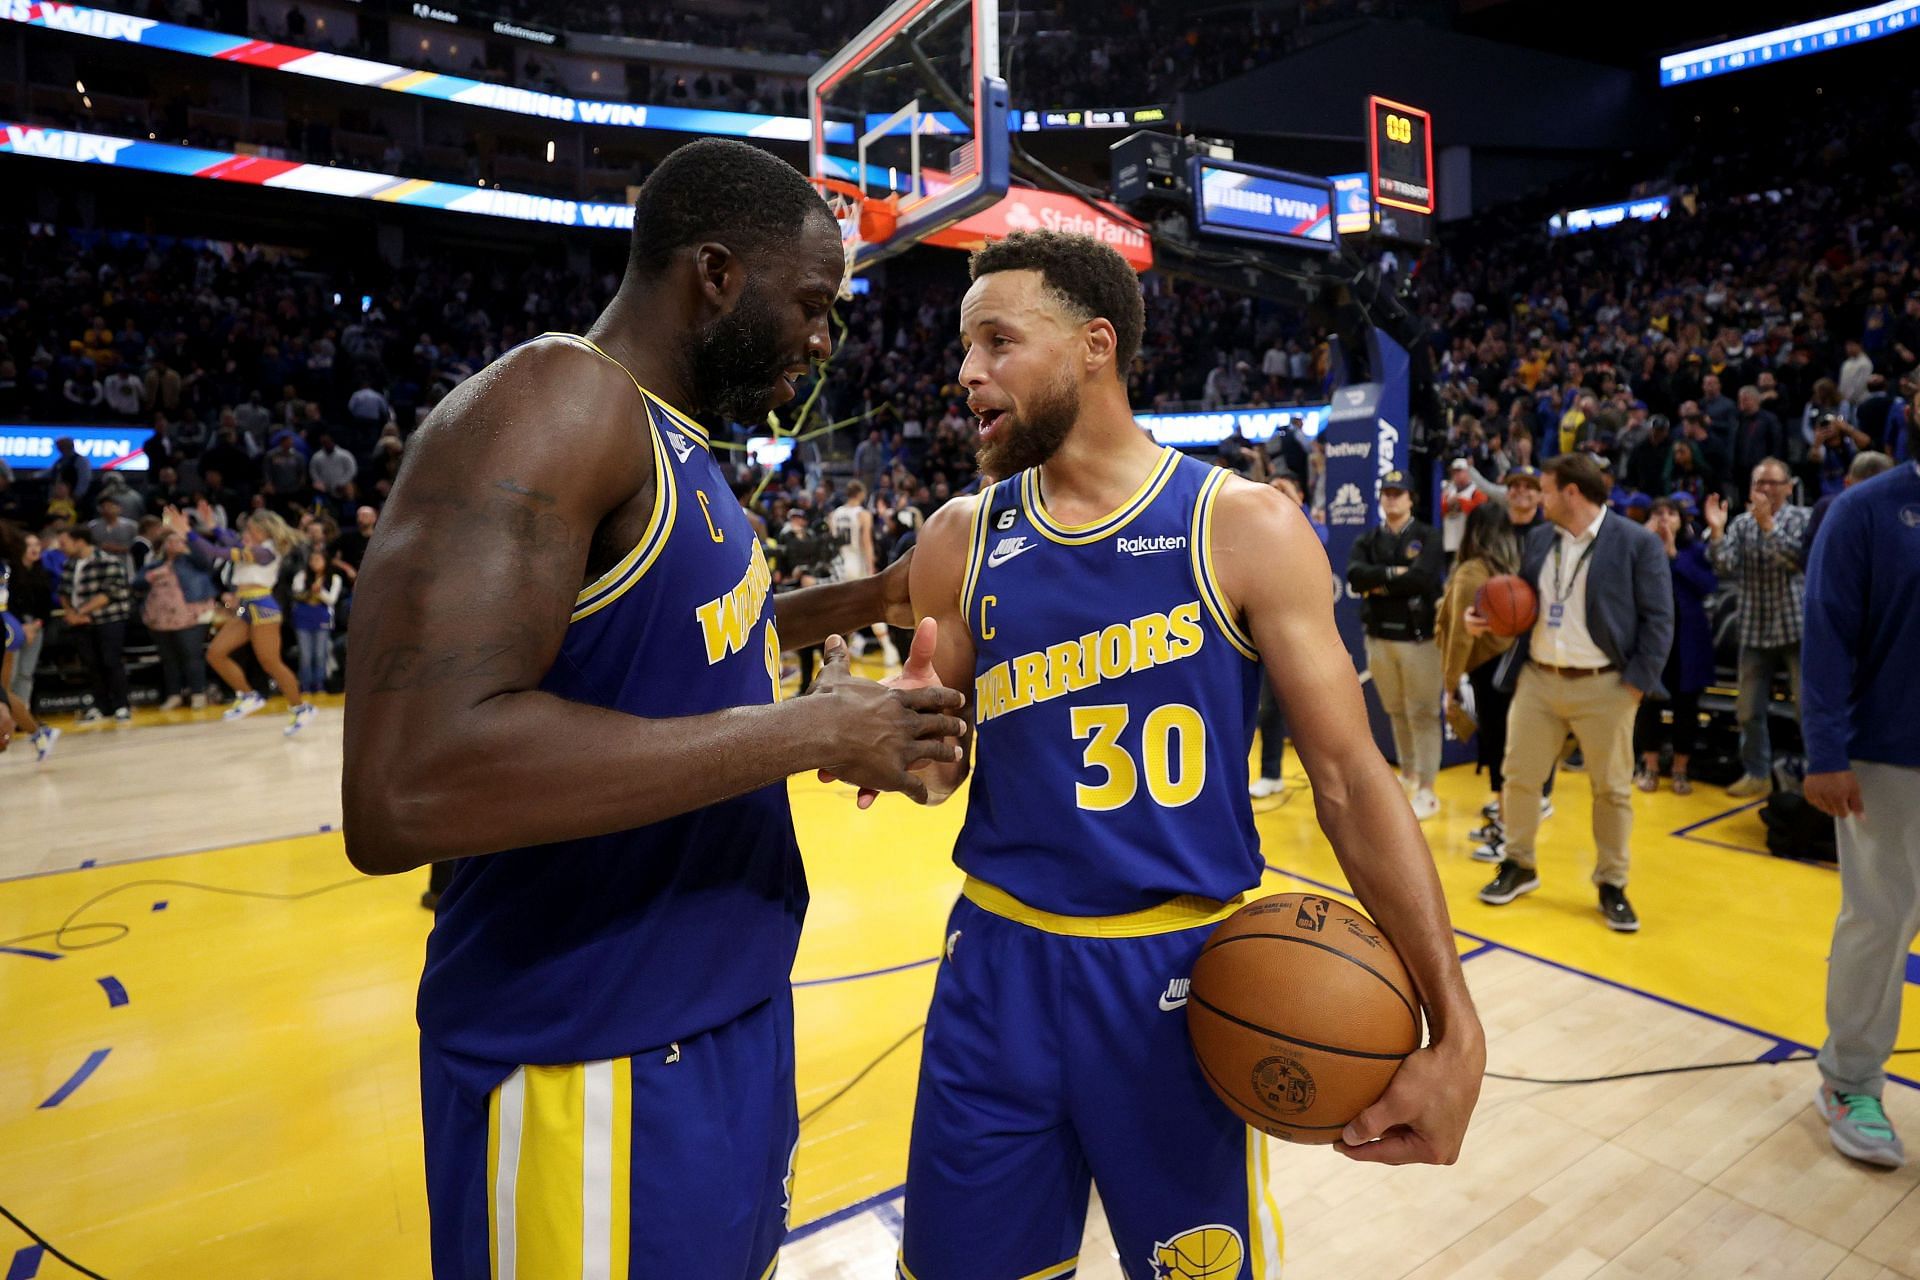 Steph Curry talked back to the Boston Celtics fans as Draymond Green continued to struggle in Game 4.